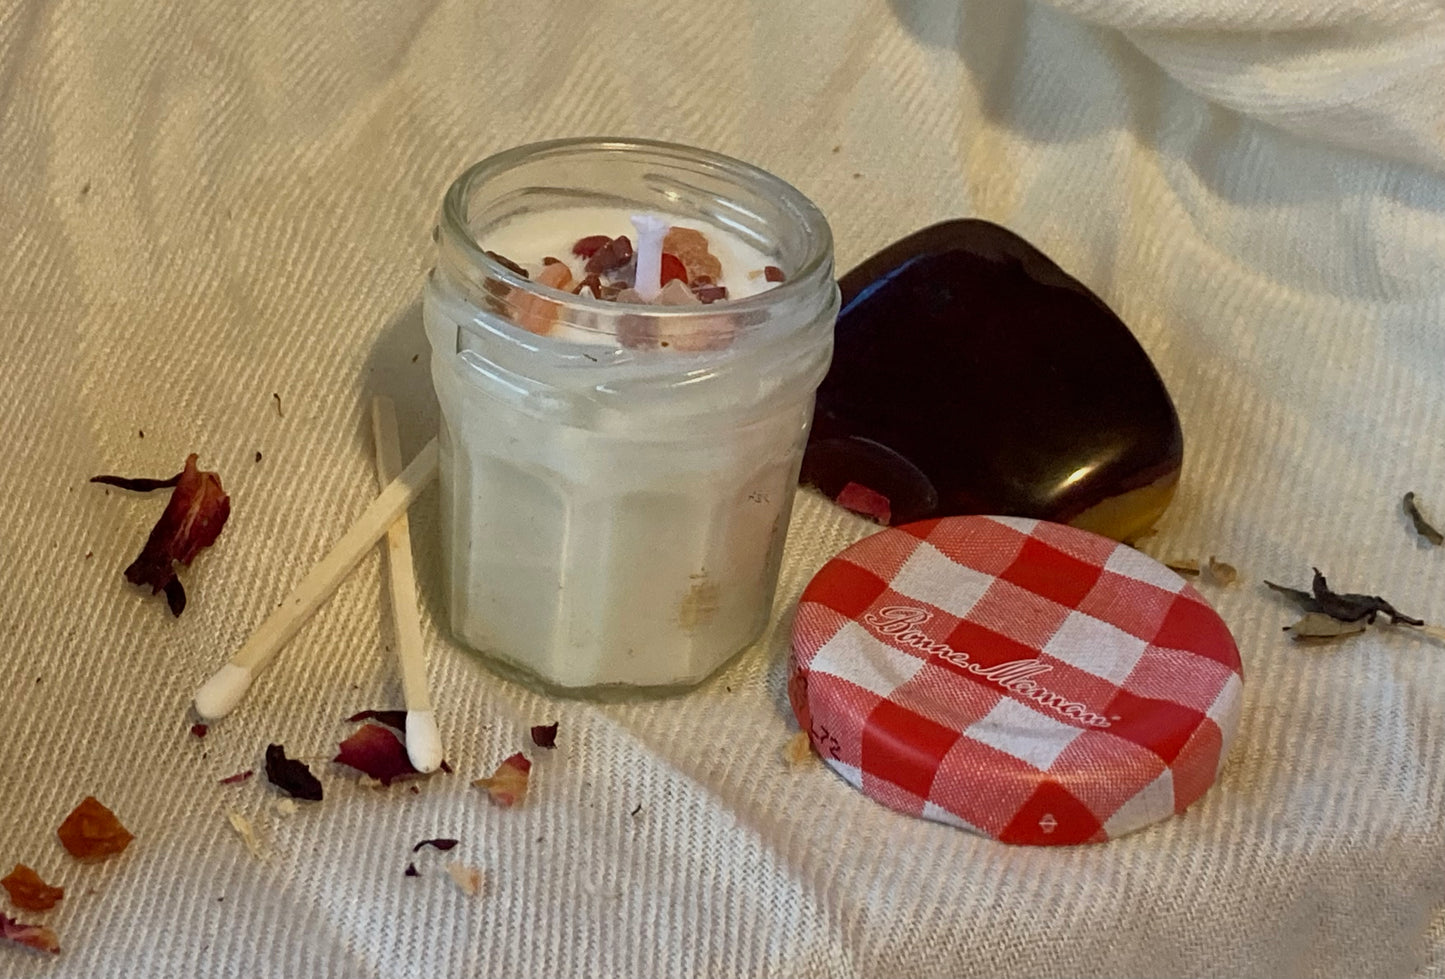 A jam jar mini candled topped with orange, red, and glittery brown crystal chips is centered against a silky white background. Two white matches are found on the left, while a large red and yellow carnelian stone and the red gingham-patterned lid of the mini jam jar are posed to the right of the candle.